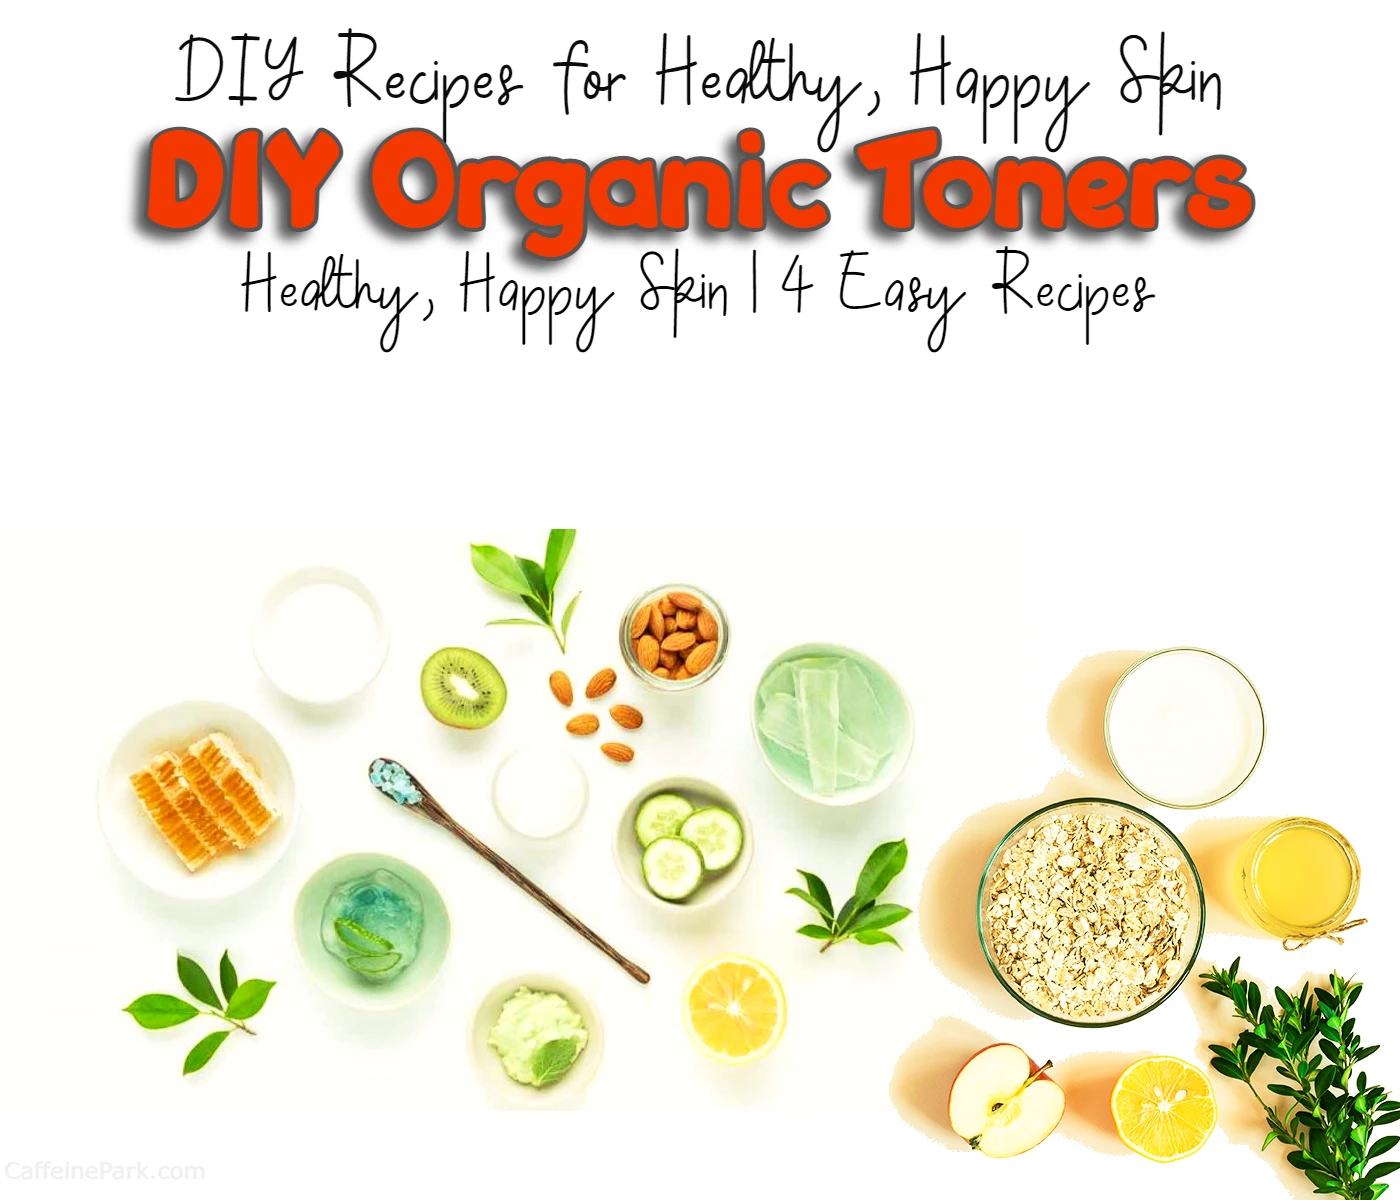 DIY Organic Toners for Healthy and Happy Skin